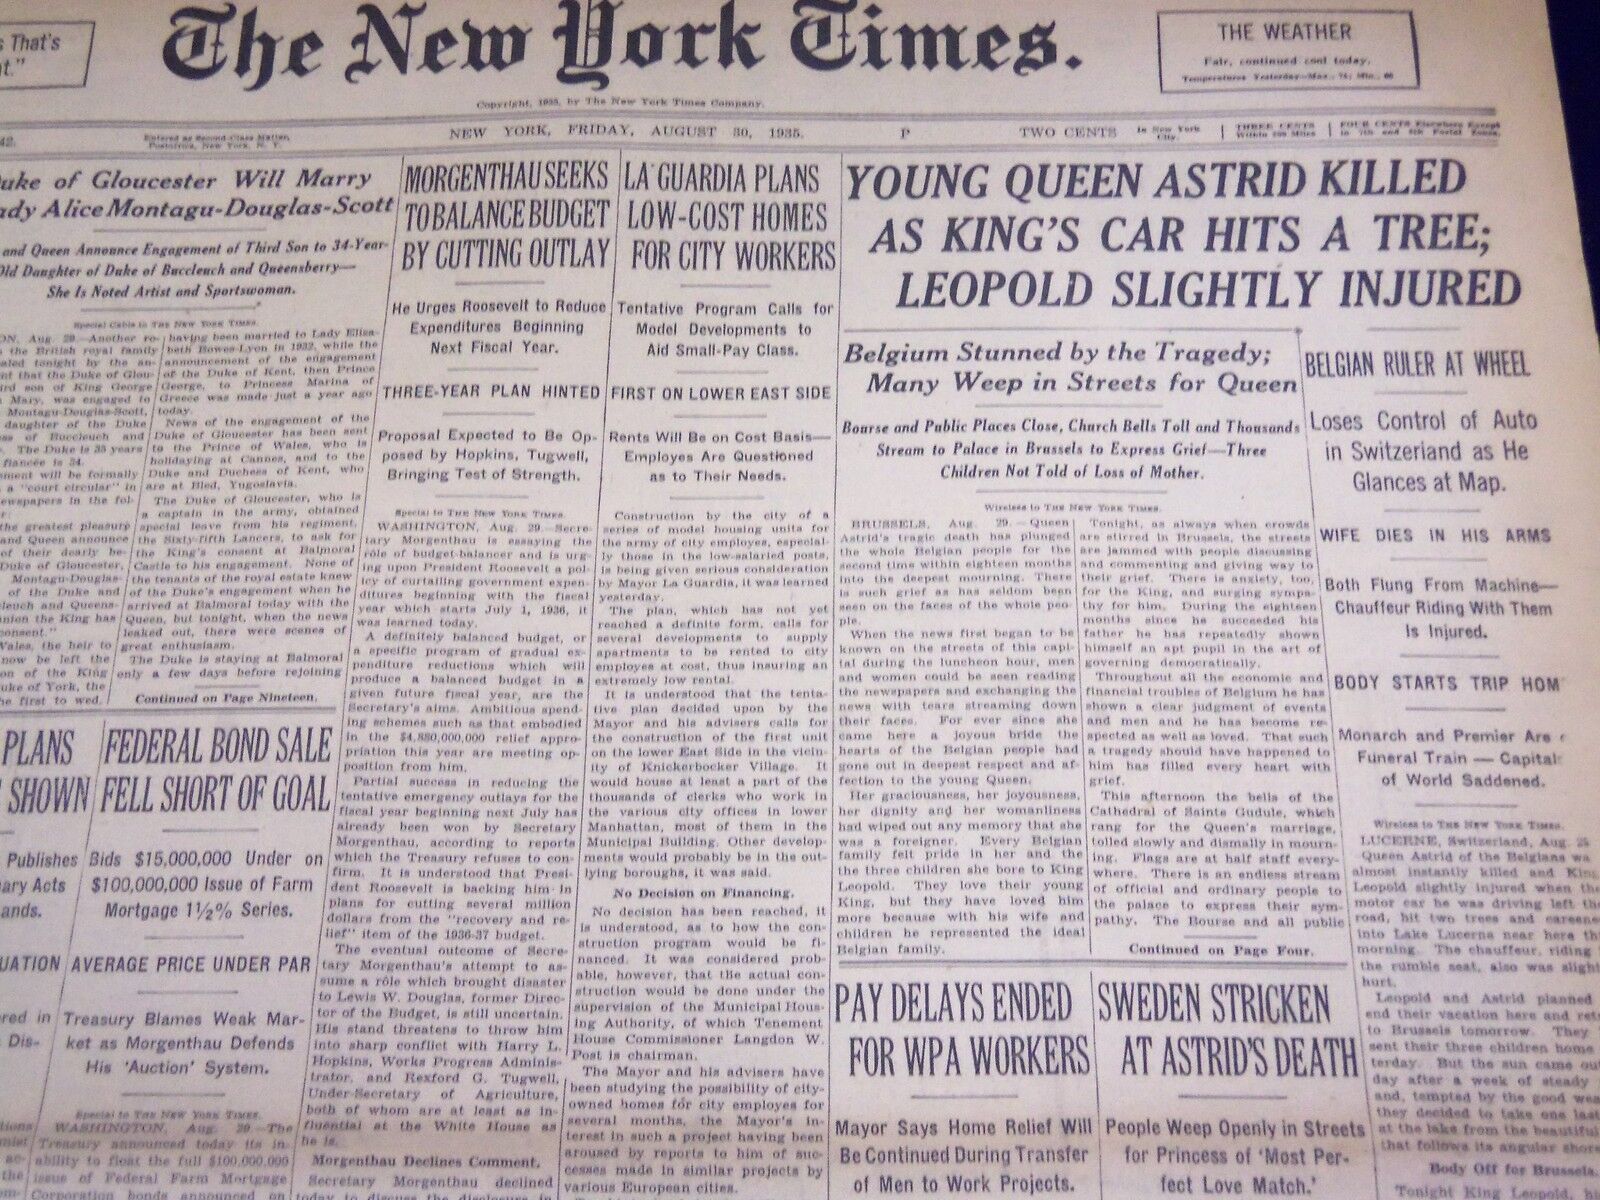 1935 AUGUST 30 NEW YORK TIMES - YOUNG QUEEN ASTRID KILLED - NT 1977